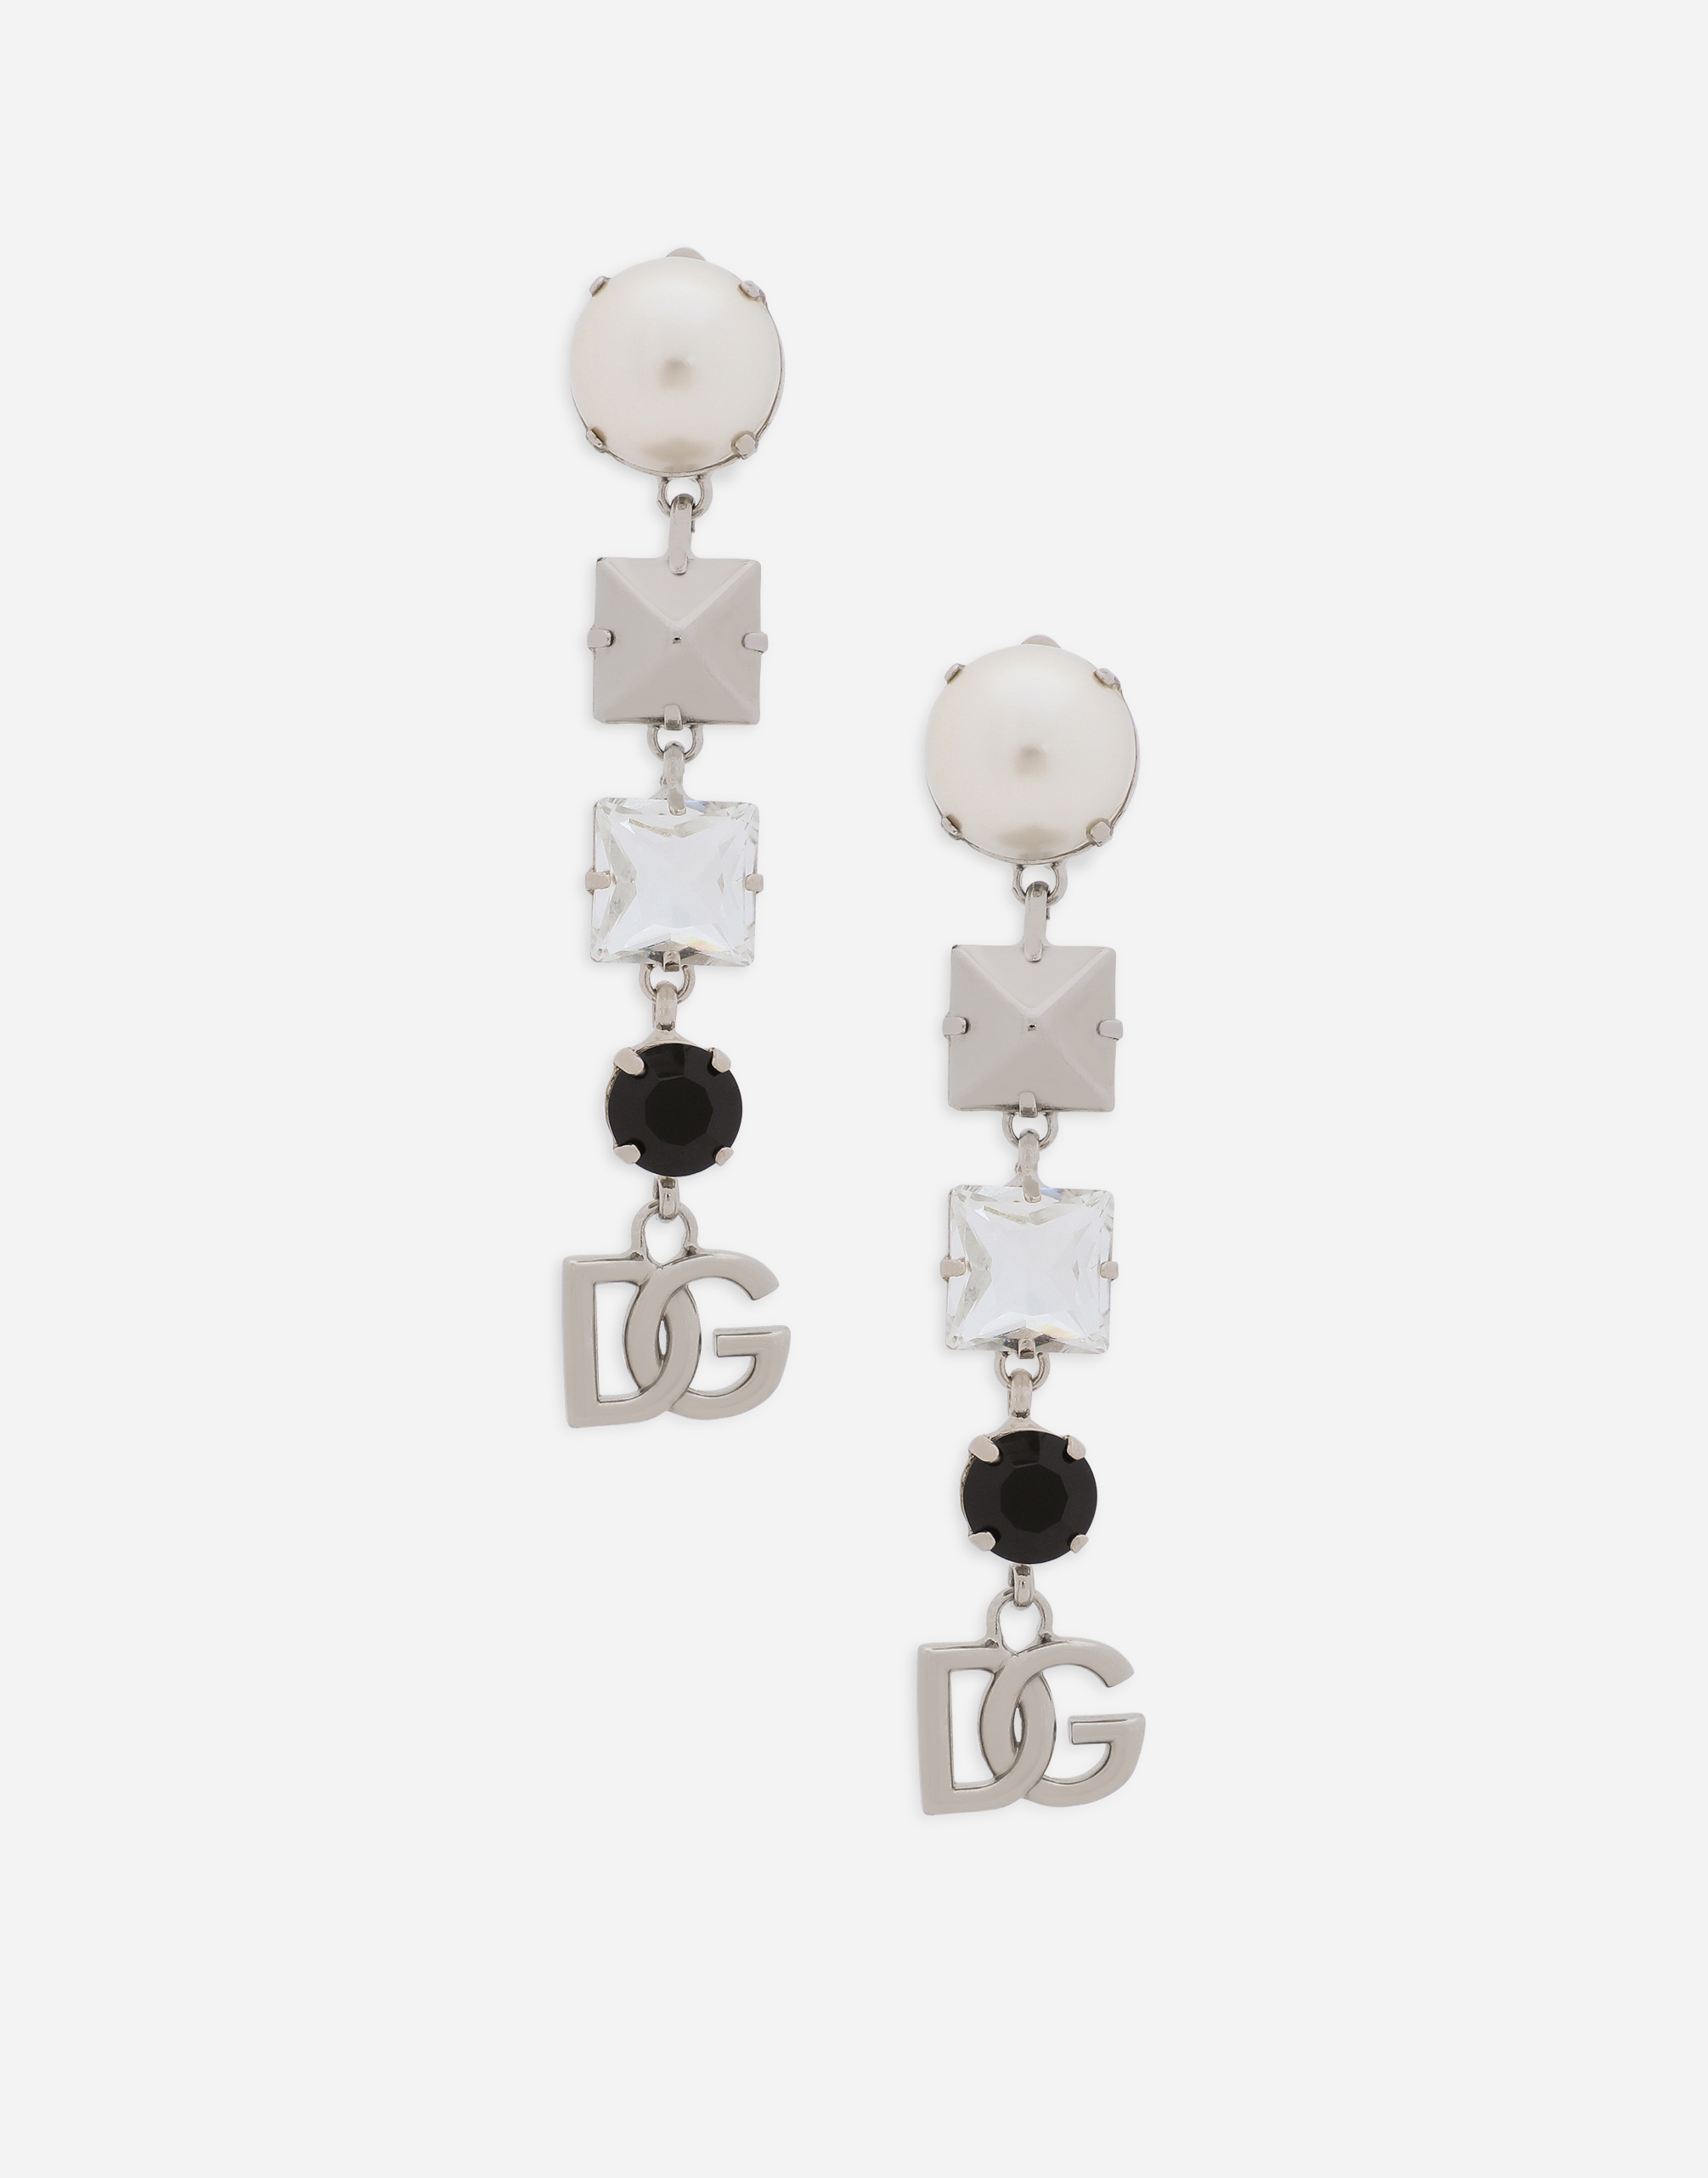 Drop earrings with rhinestones and DG logo in Silver